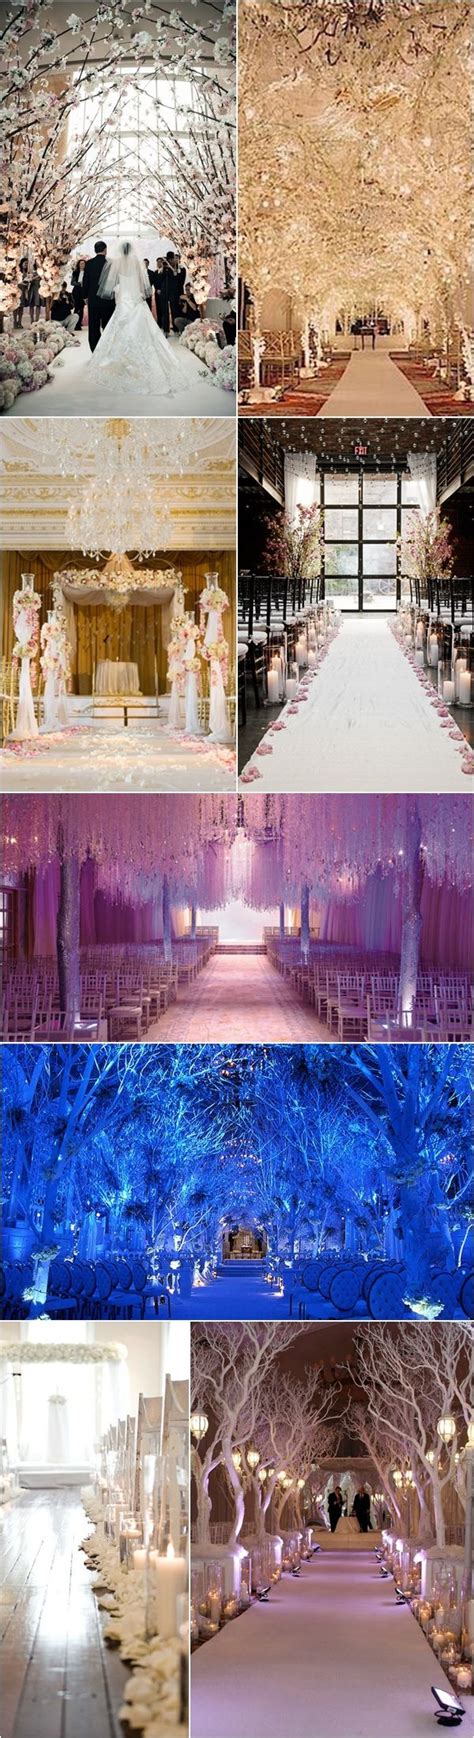 40 Great Wedding Aisle Ideas For Your Big Day